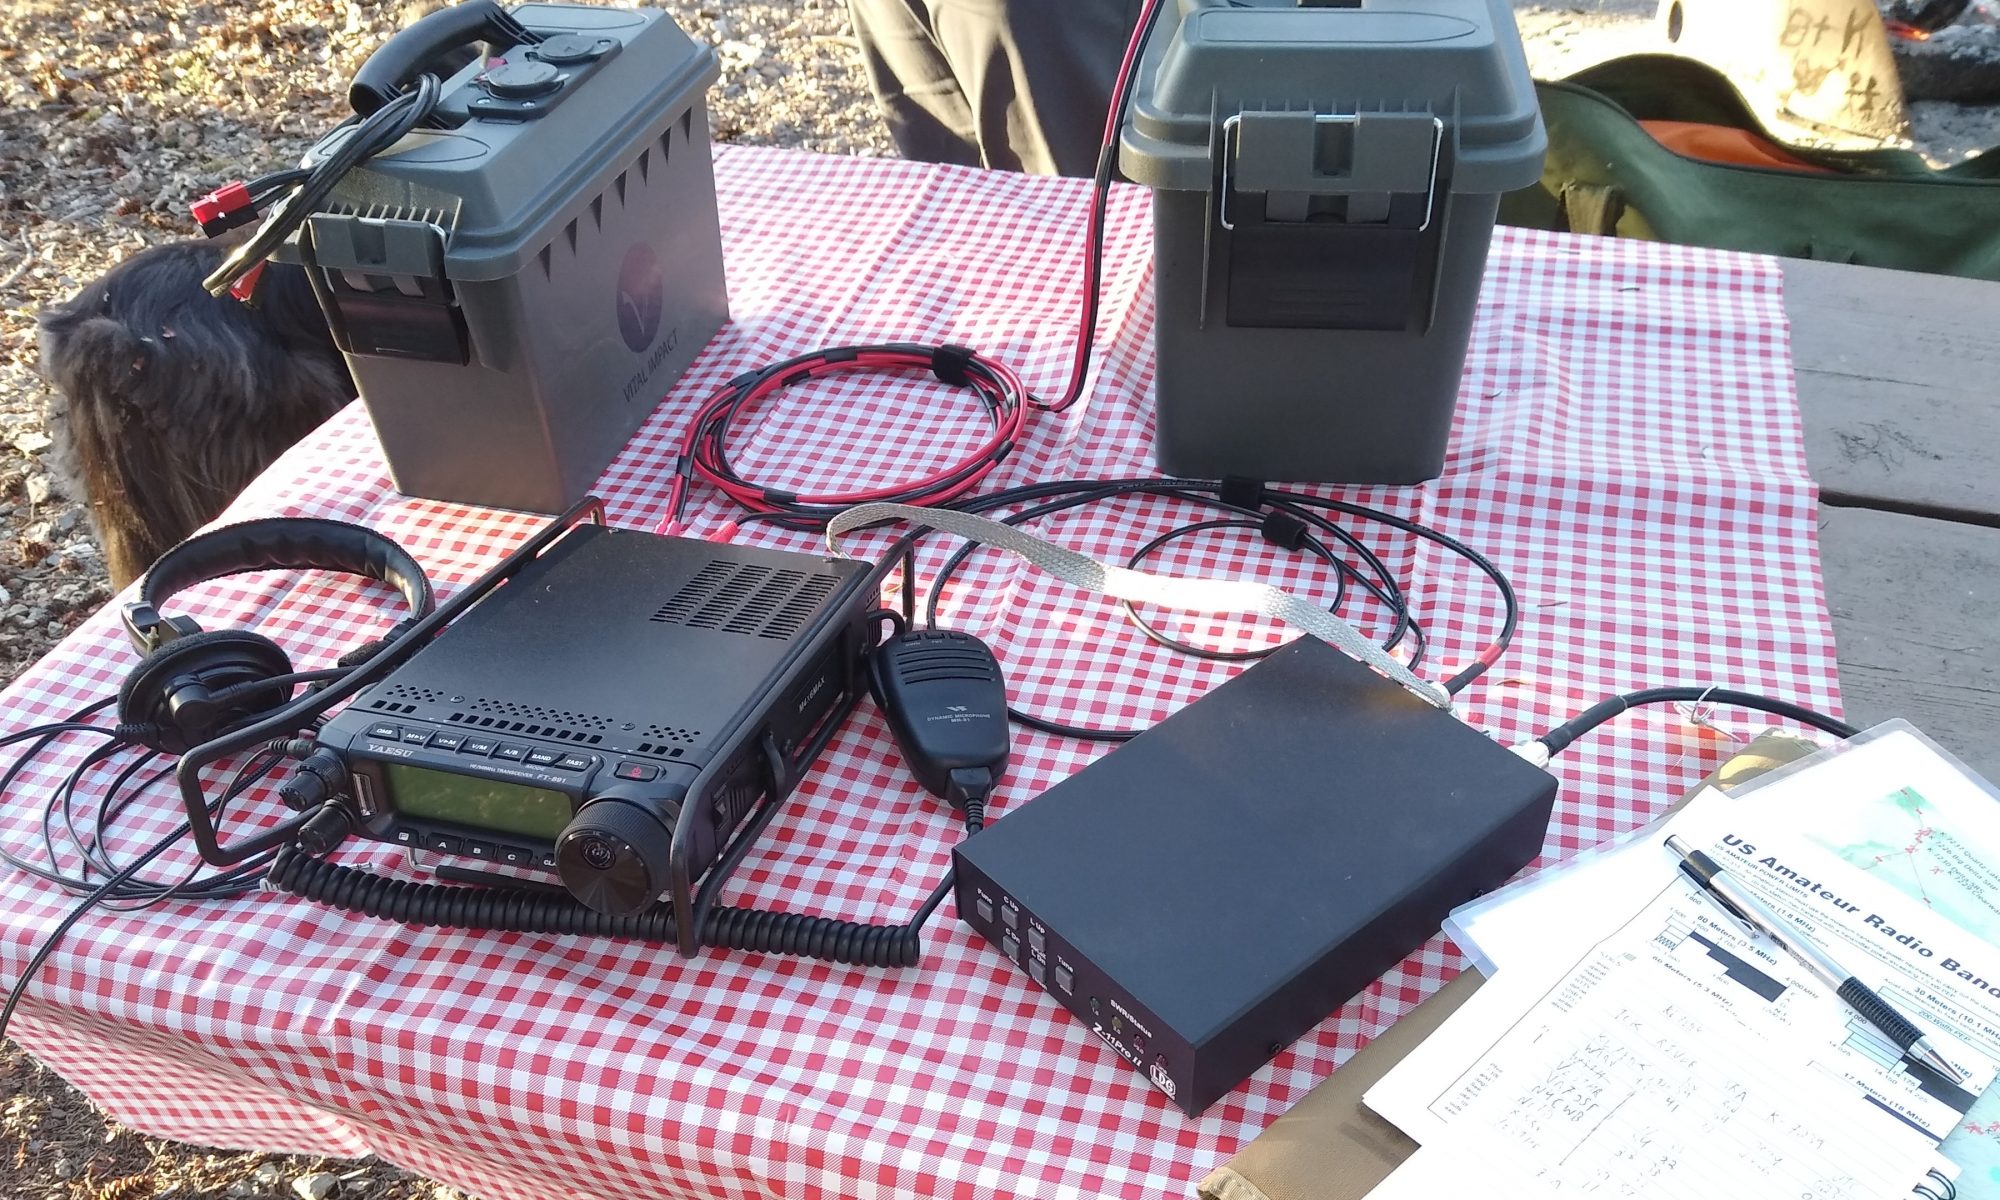 Field radio station with portable power packs